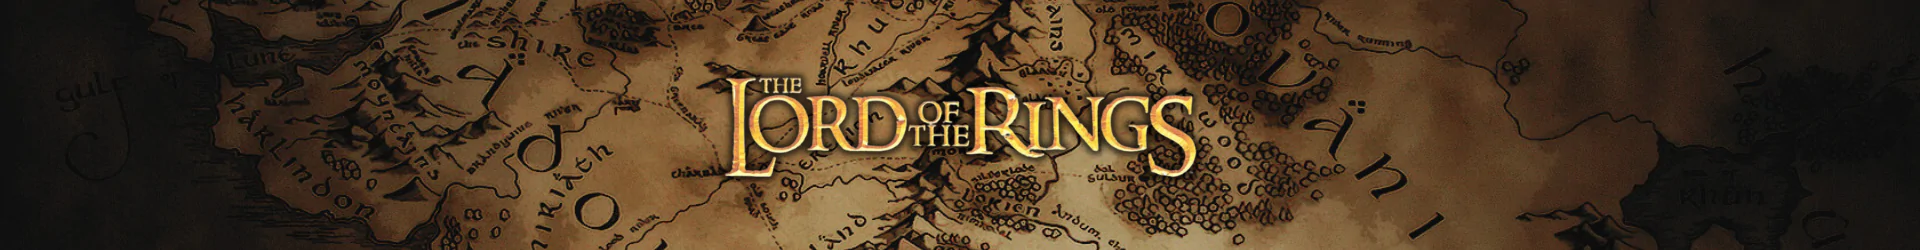 Lord of the Rings puzzles banner